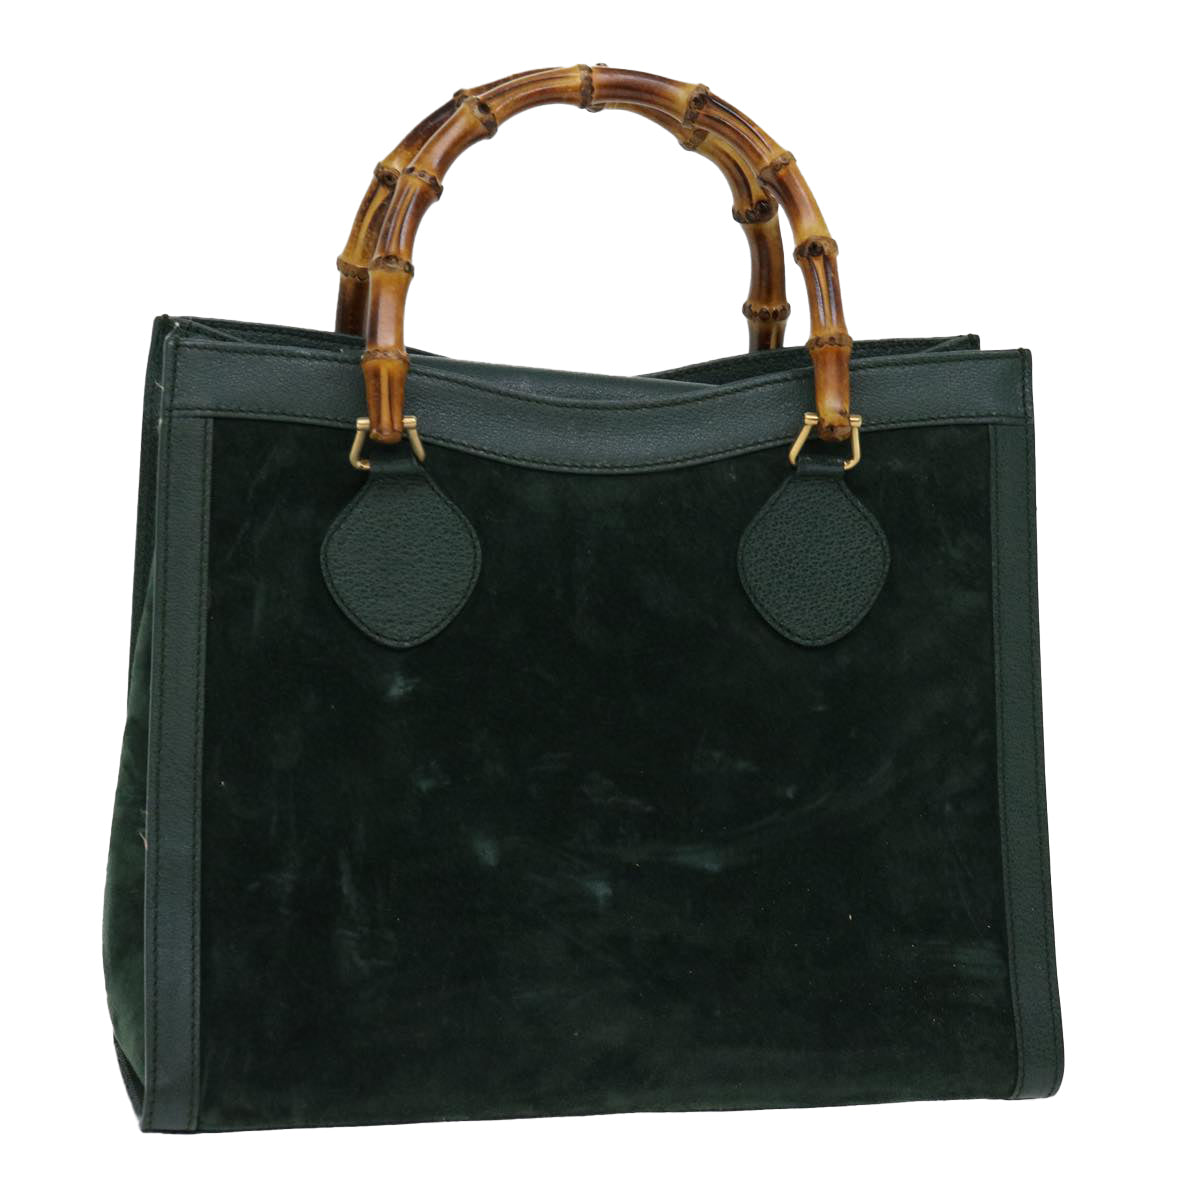 GUCCI Bamboo Tote Bag Suede Green 002 2853 0260 0 Auth ep3721